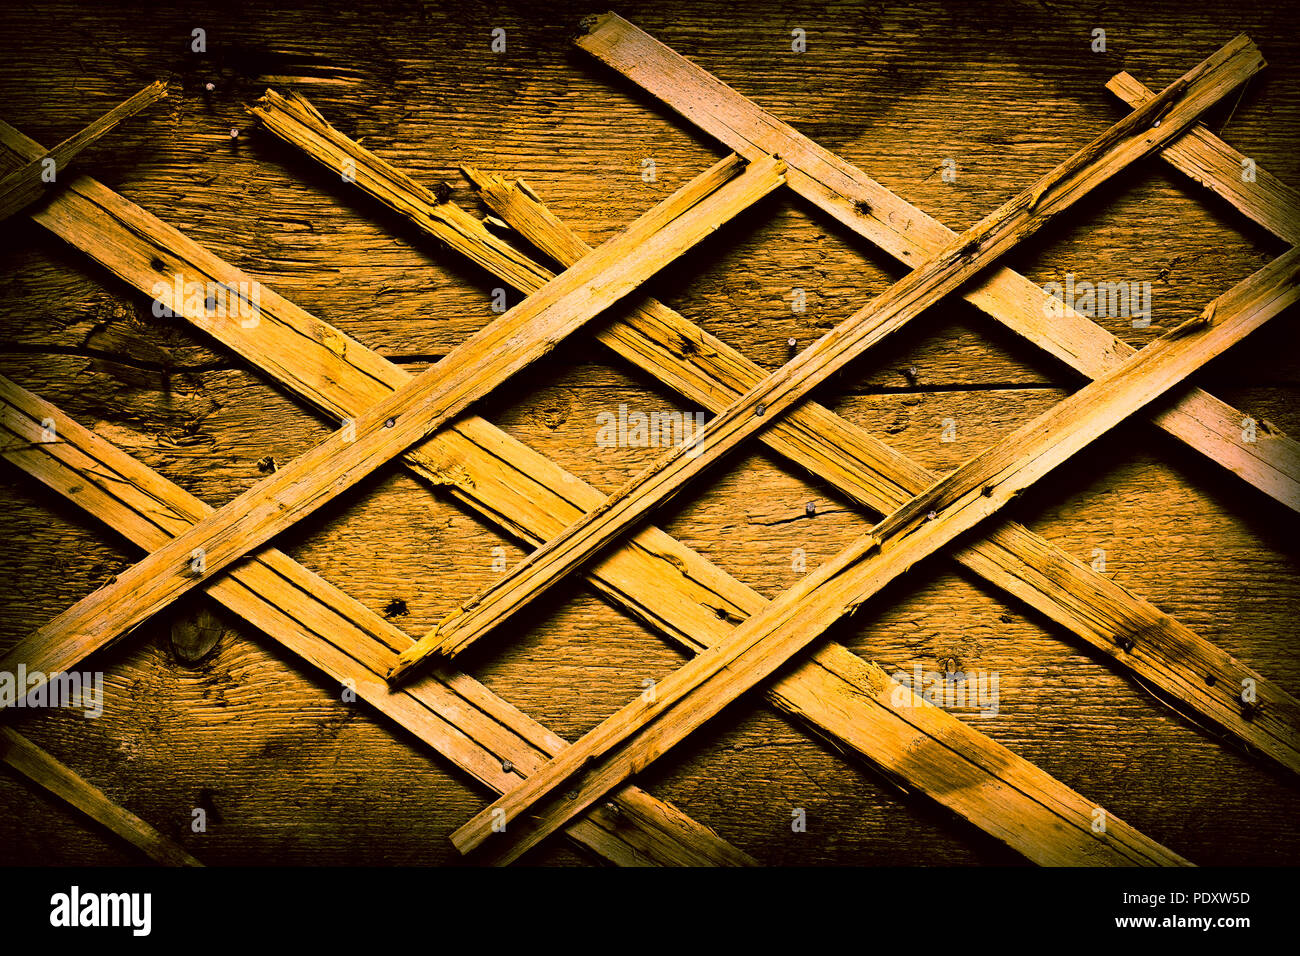 Wooden texture with shingles. Stock Photo